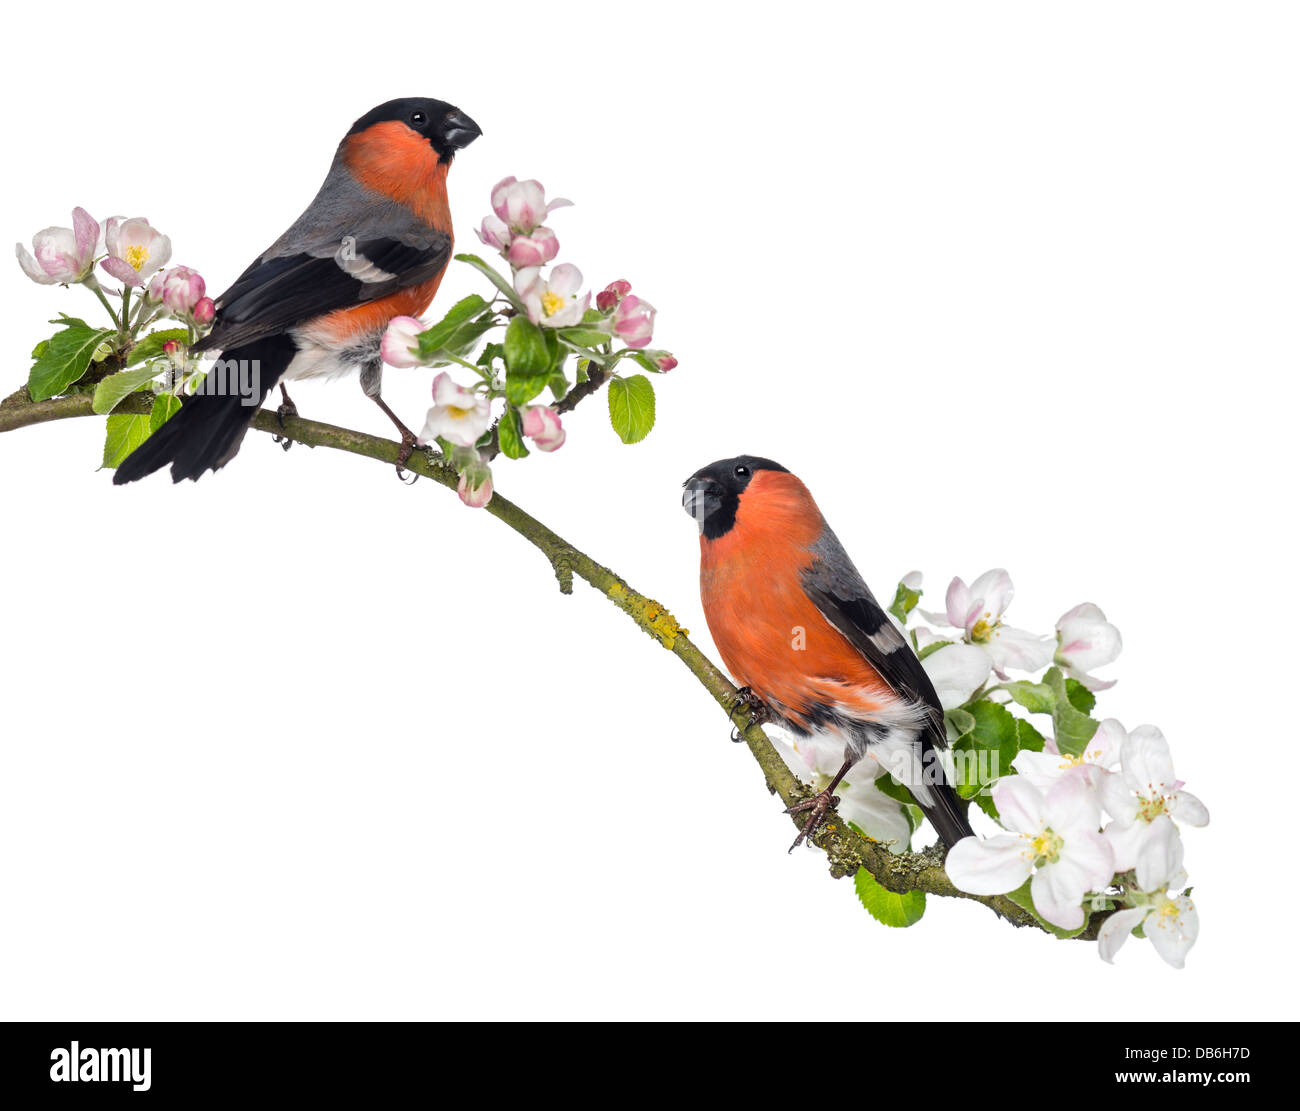 Eurasian Bullfinches, Pyrrhula pyrrhula, perched on blossoming branch against white background Stock Photo